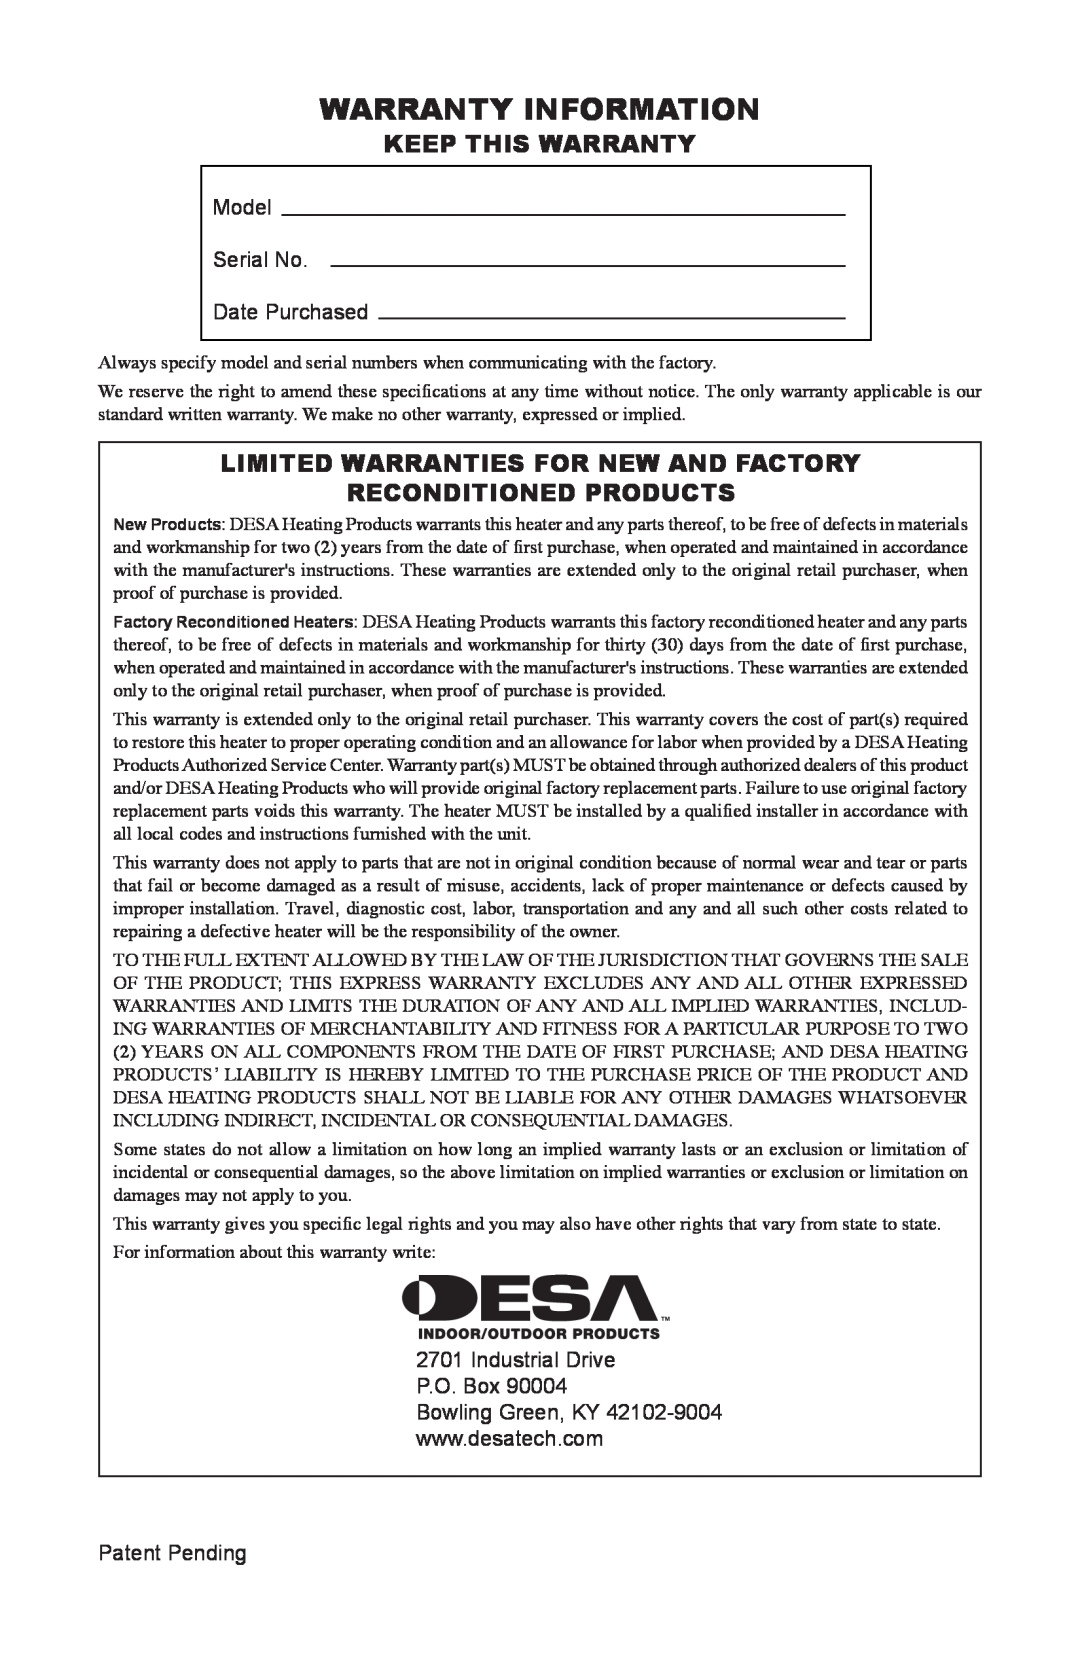 Desa LSF20PT Warranty Information, Keep This Warranty, Limited Warranties For New And Factory, Reconditioned Products 